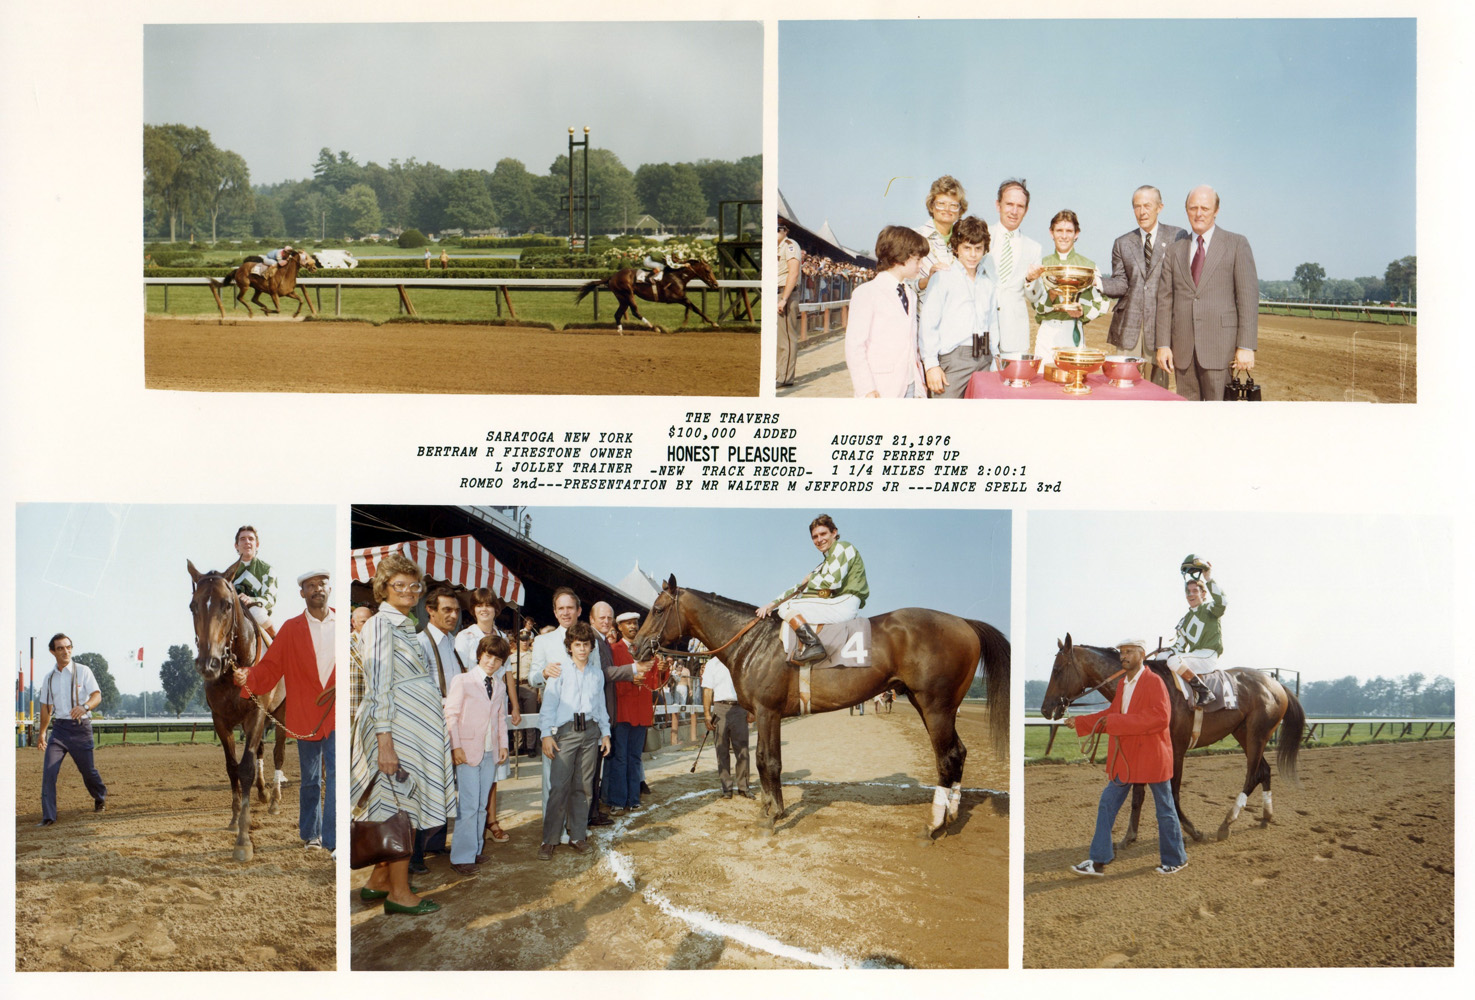 Win composite photograph for the 1976 Travers Stakes, won by Honest Pleasure (Craig Perret up), trained by LeRoy Jolley (NYRA/Bob Coglianese /Museum Collection)